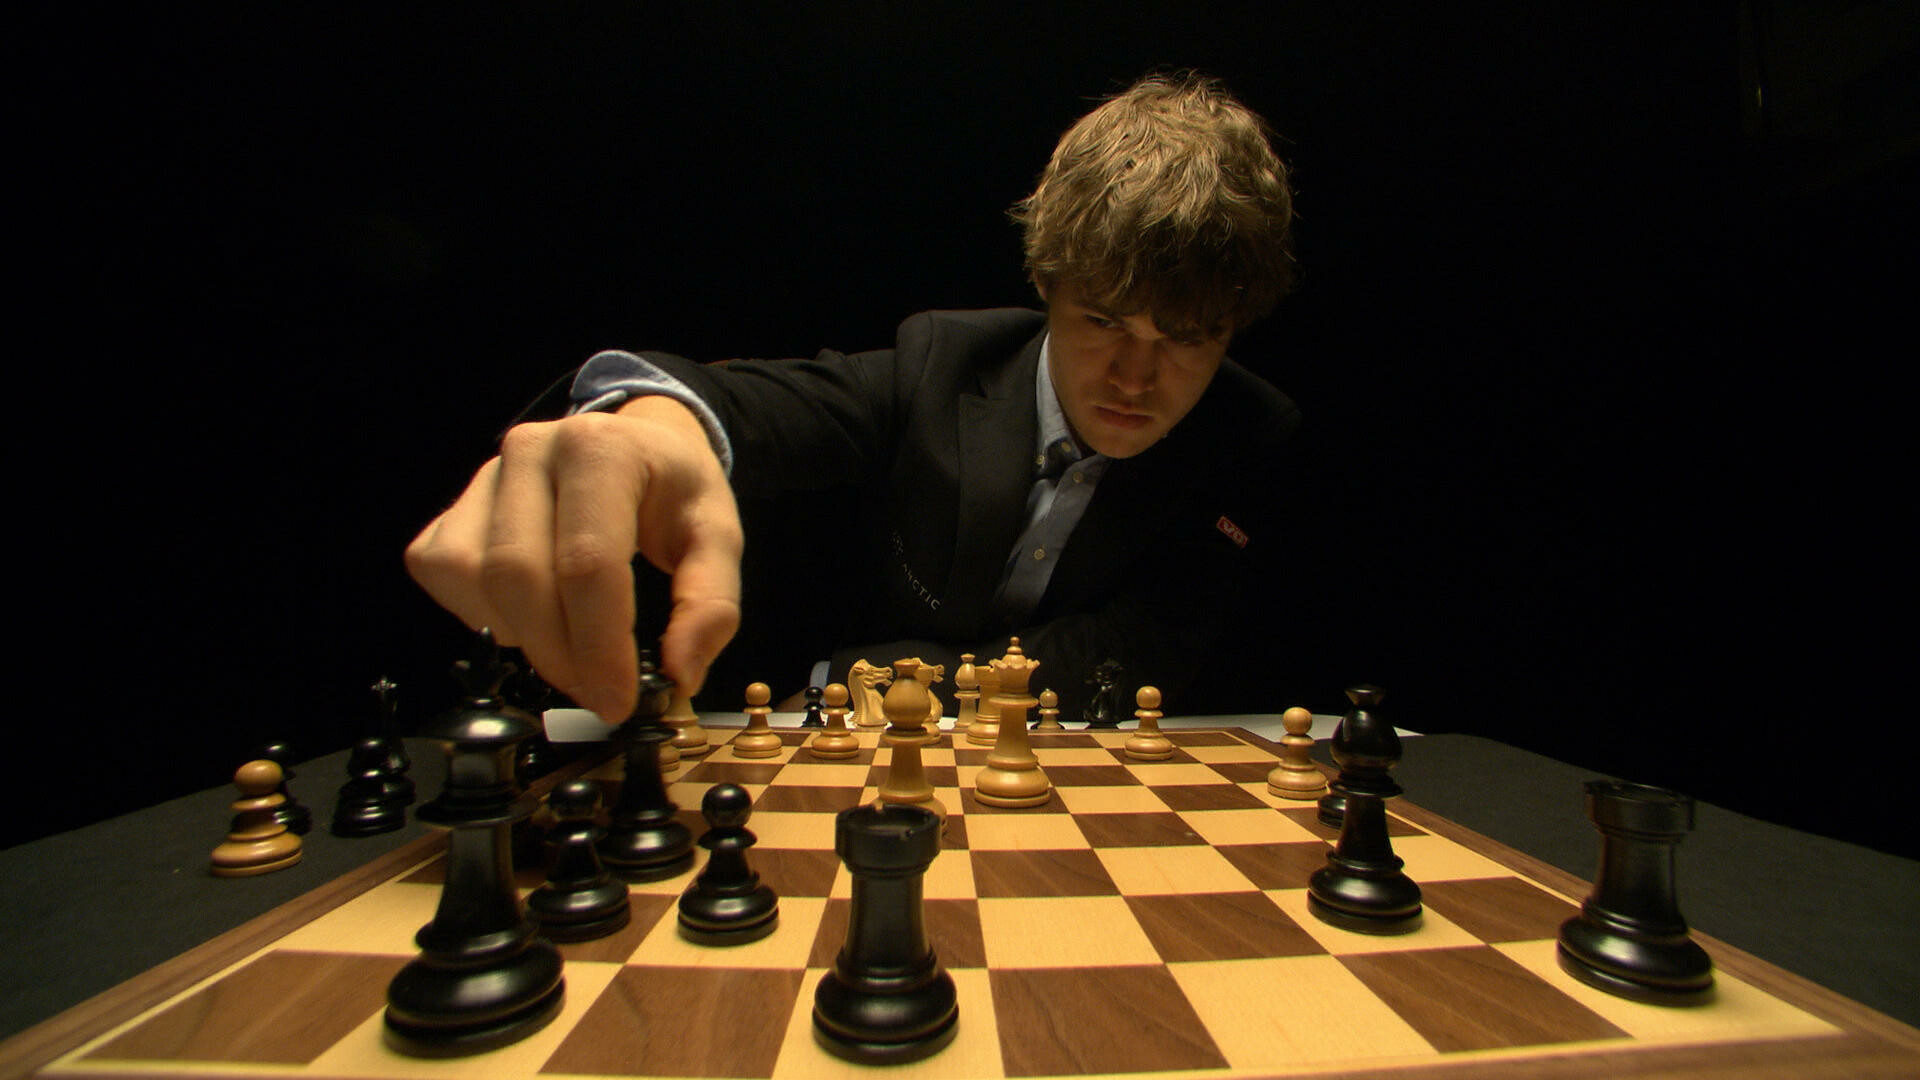 Magnus Carlsen: World's No. 1 chess player, Defended his classical world title against Sergey Karjakin in 2016. 1920x1080 Full HD Background.